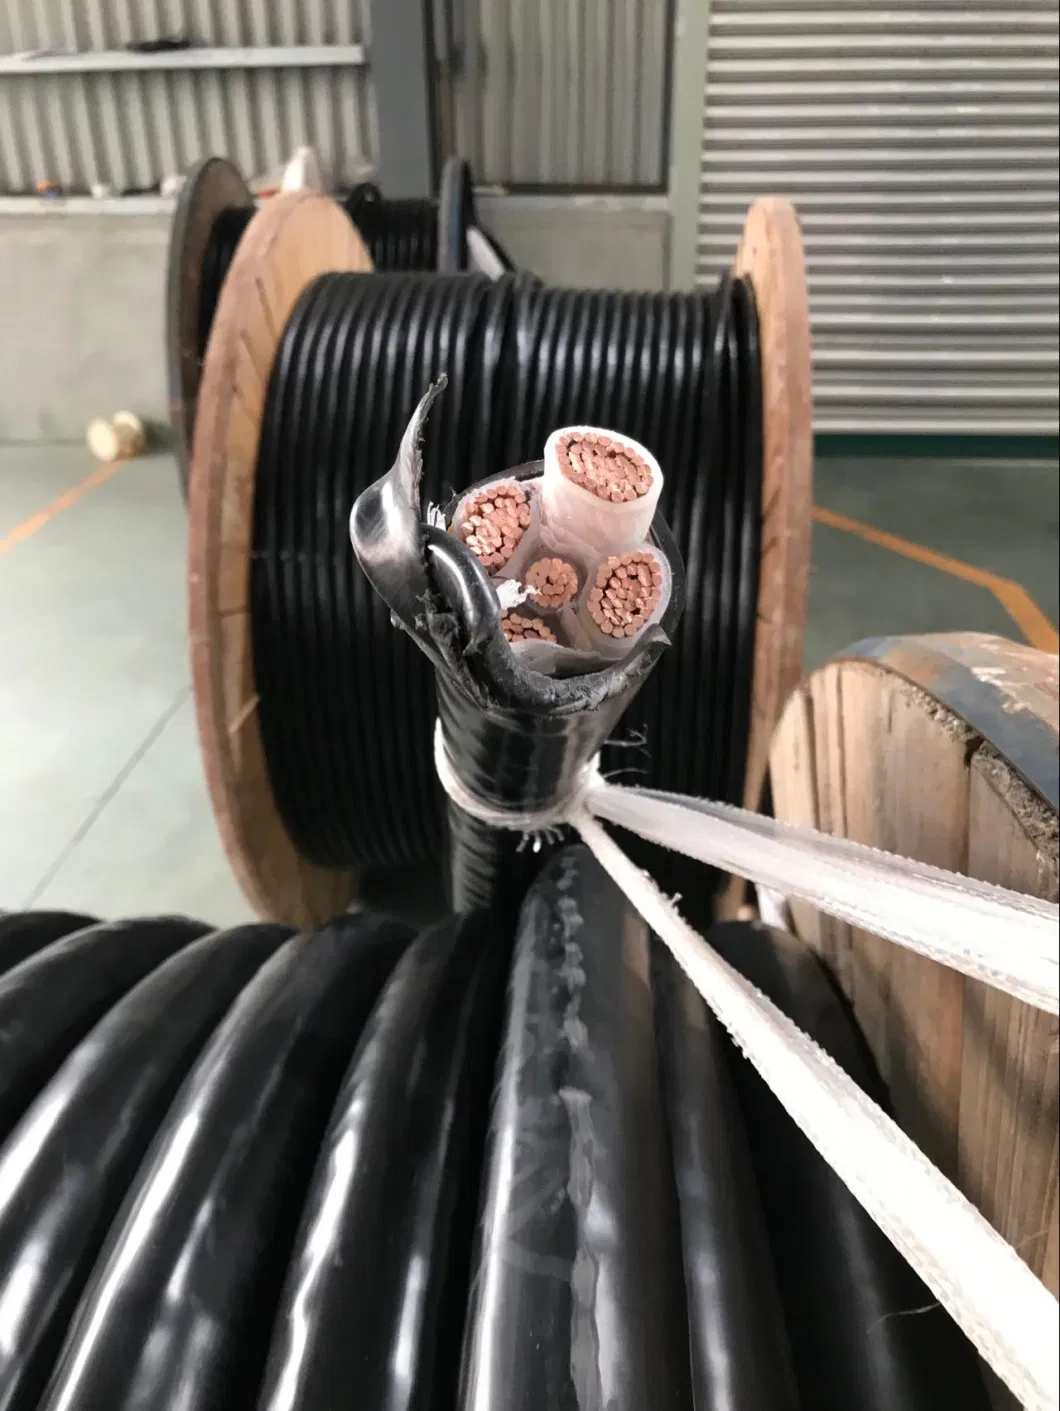 PVC Insulated Aluminium Wire 6.0mm for Domestic and Industrial Electric Connections